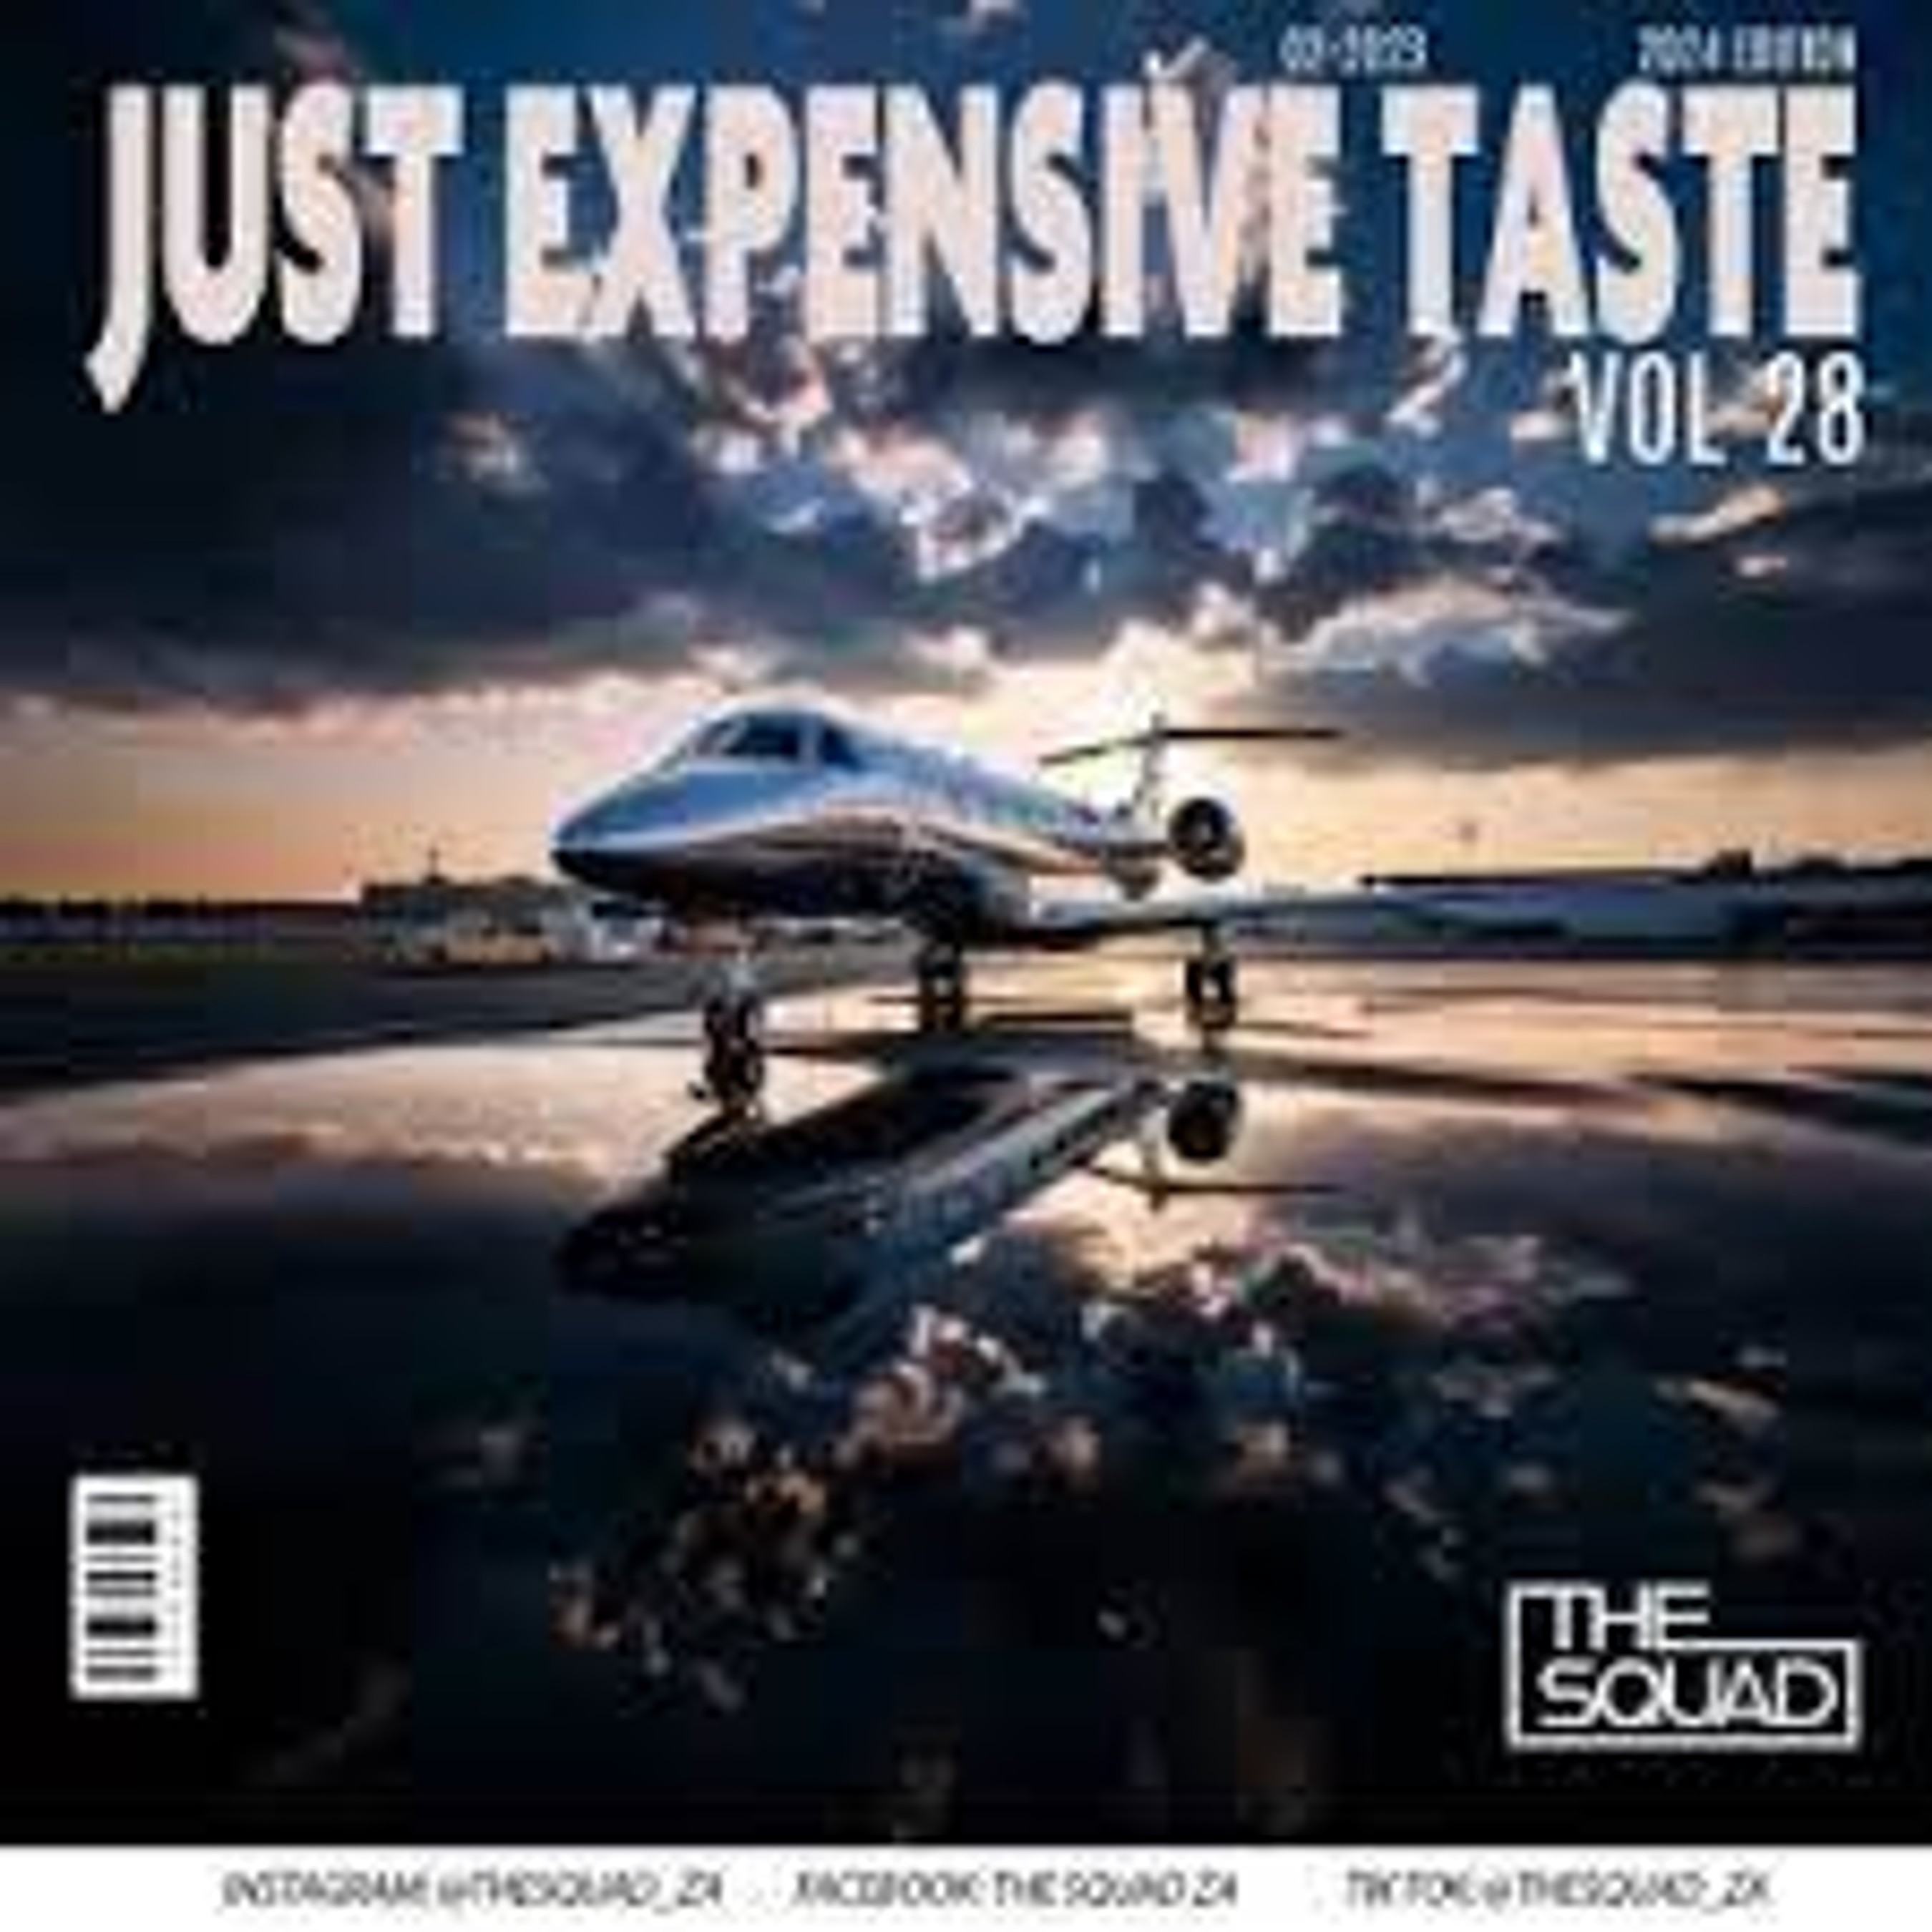 The Squad – Just Expensive Taste Vol. 28 Mix Mp3 Download Fakaza: